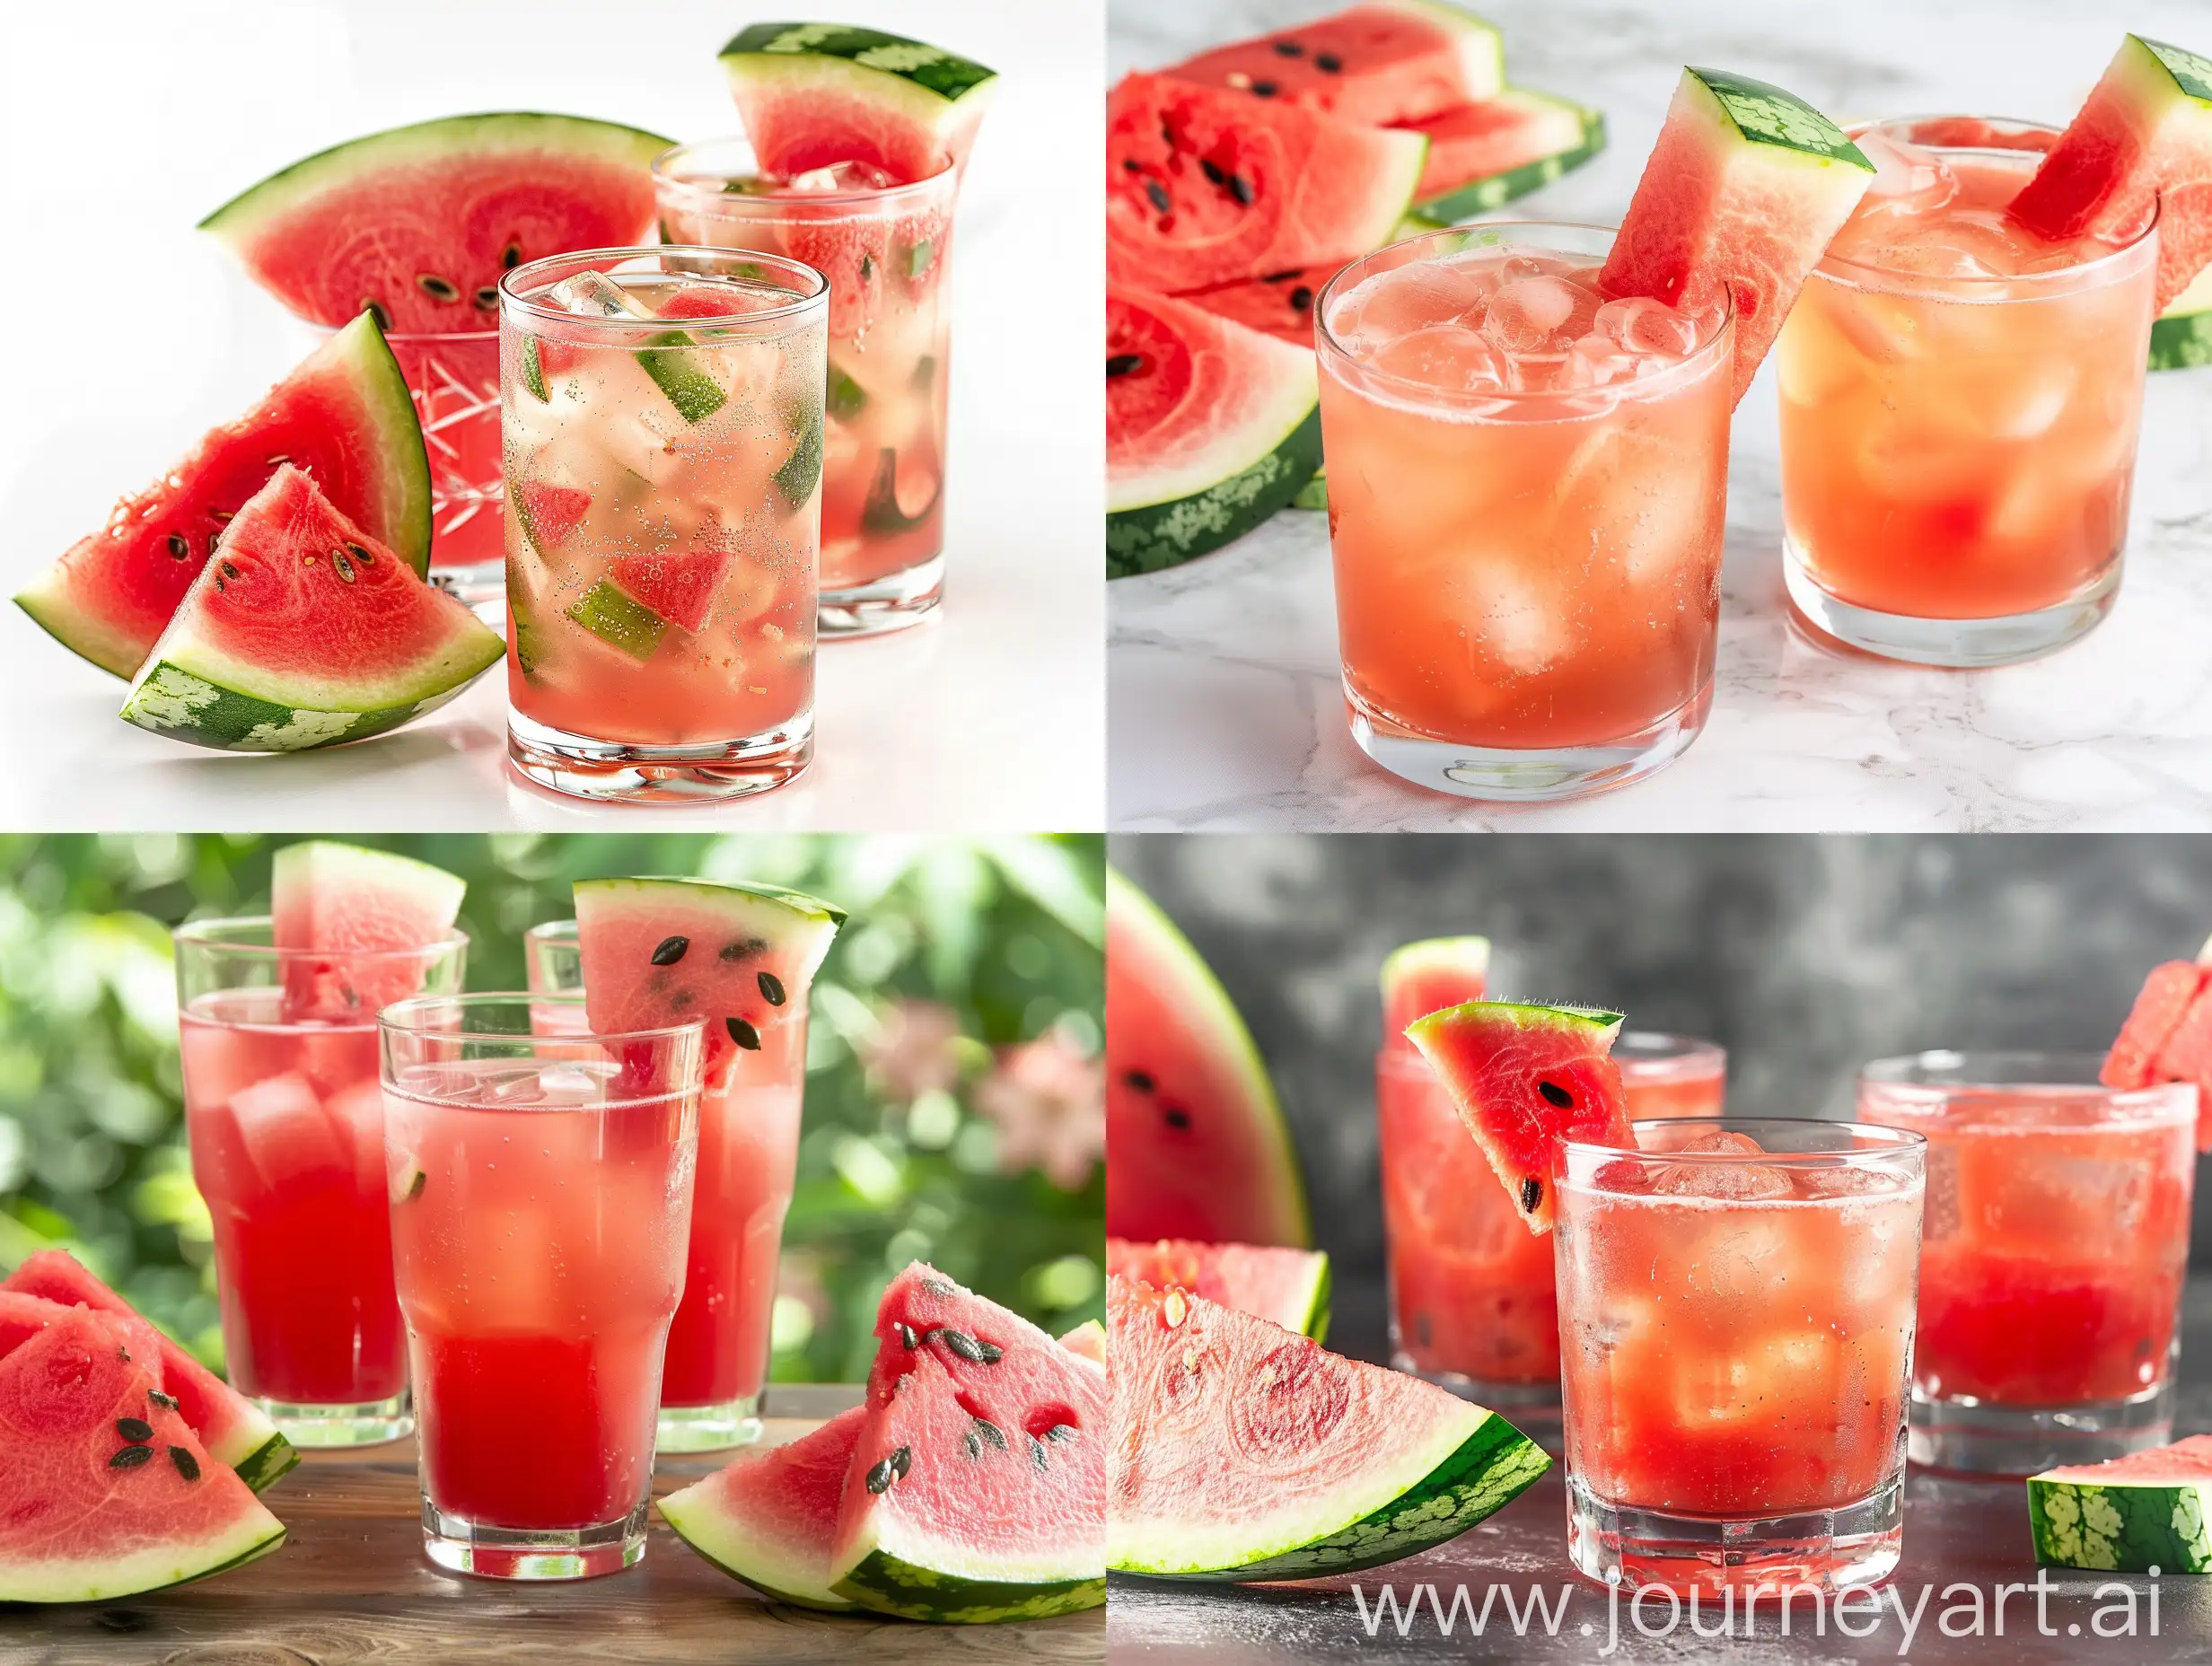 Refreshing-Watermelon-Drink-in-Glasses-with-Slices-Summer-Beverage-Concept